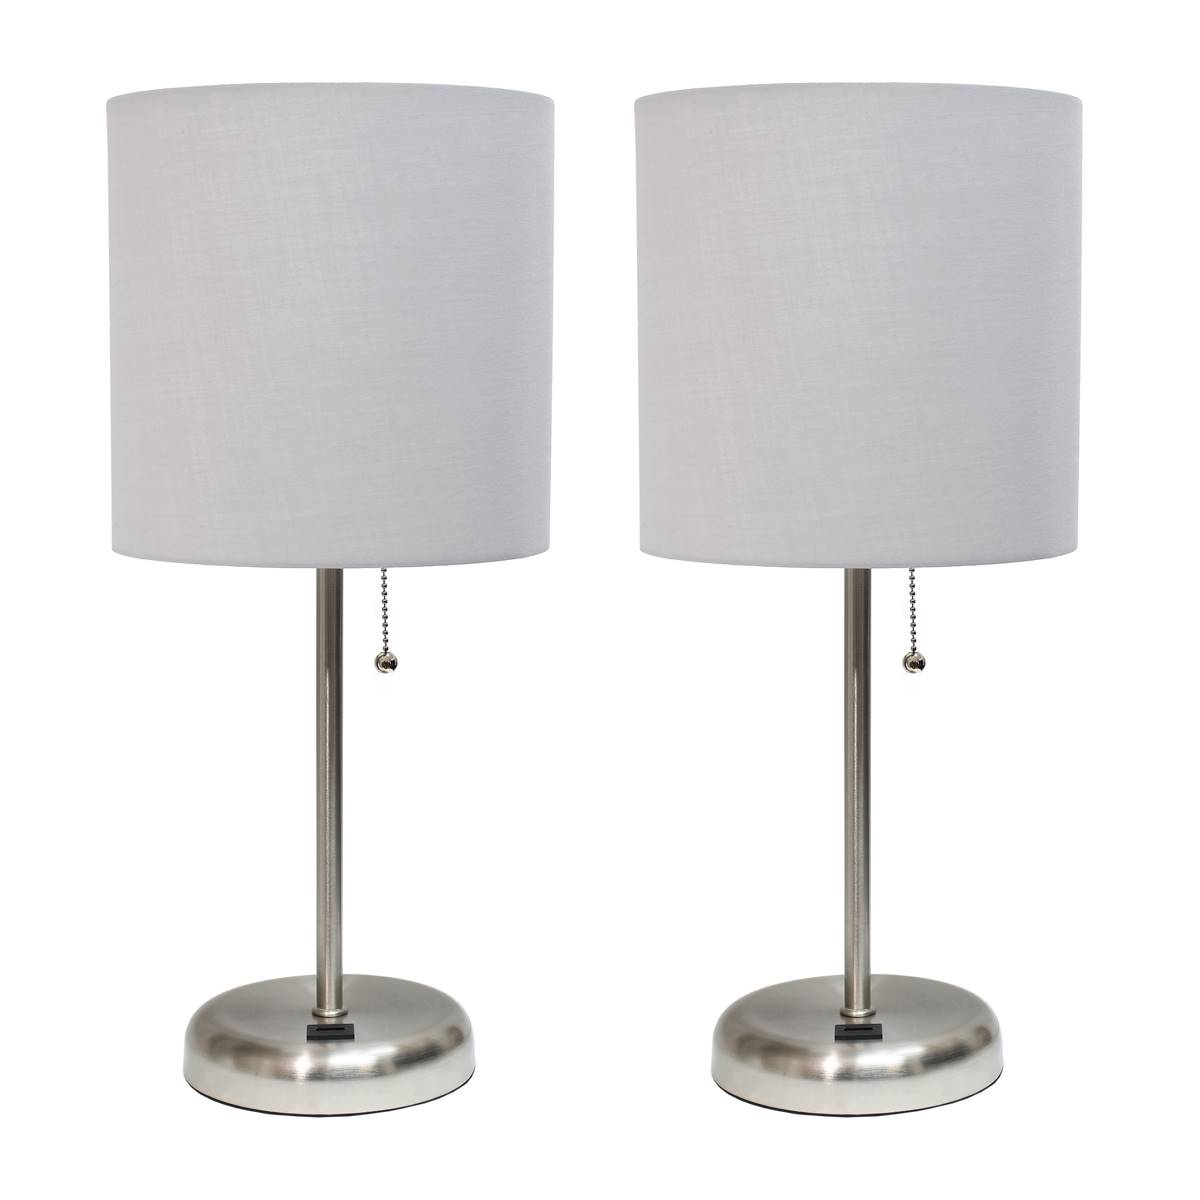 LimeLights Brushed Steel Lamp/USB Charging Port/Grey Fabric Shade